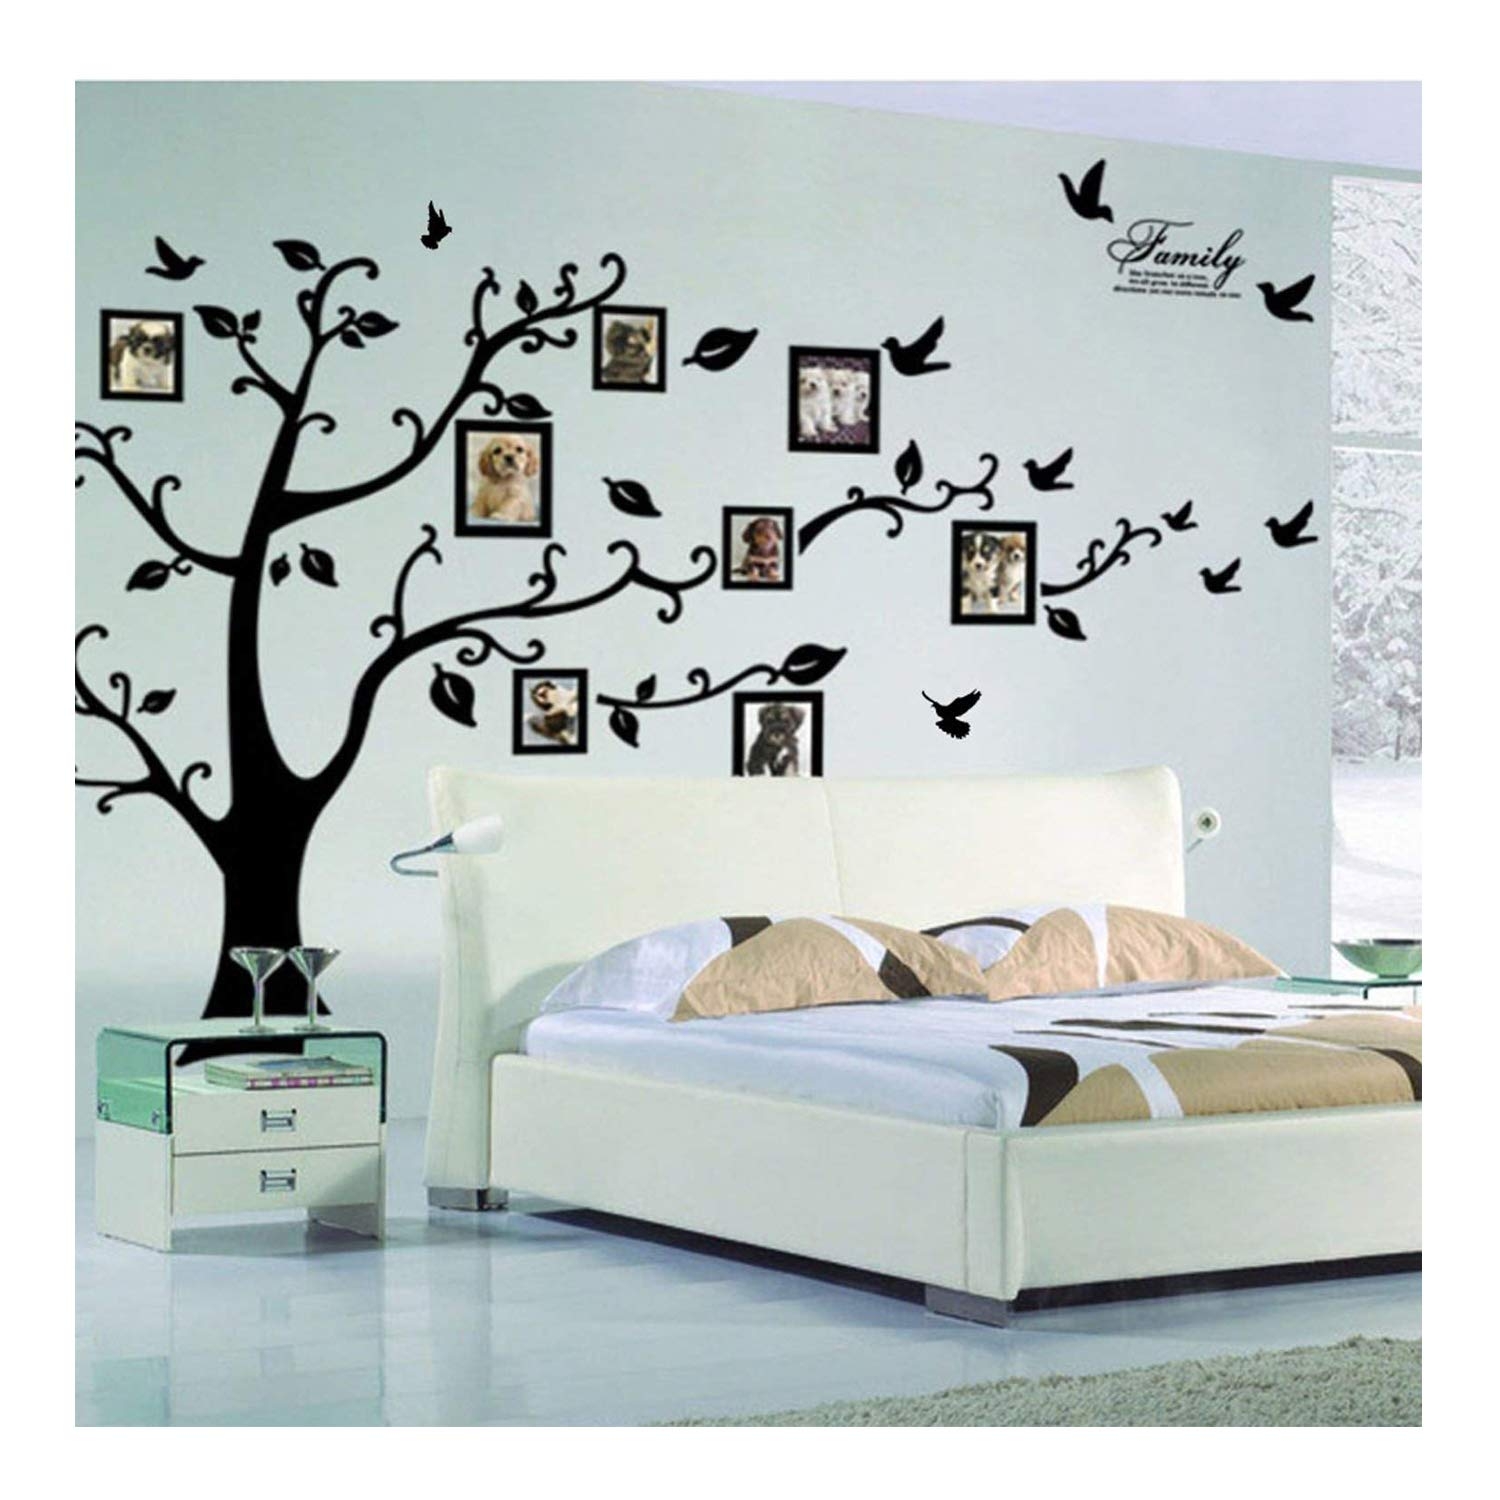 Wall Diy 3D Photo Tree Mural Decal Family Frame Home Decor Art Stickers PVC Room